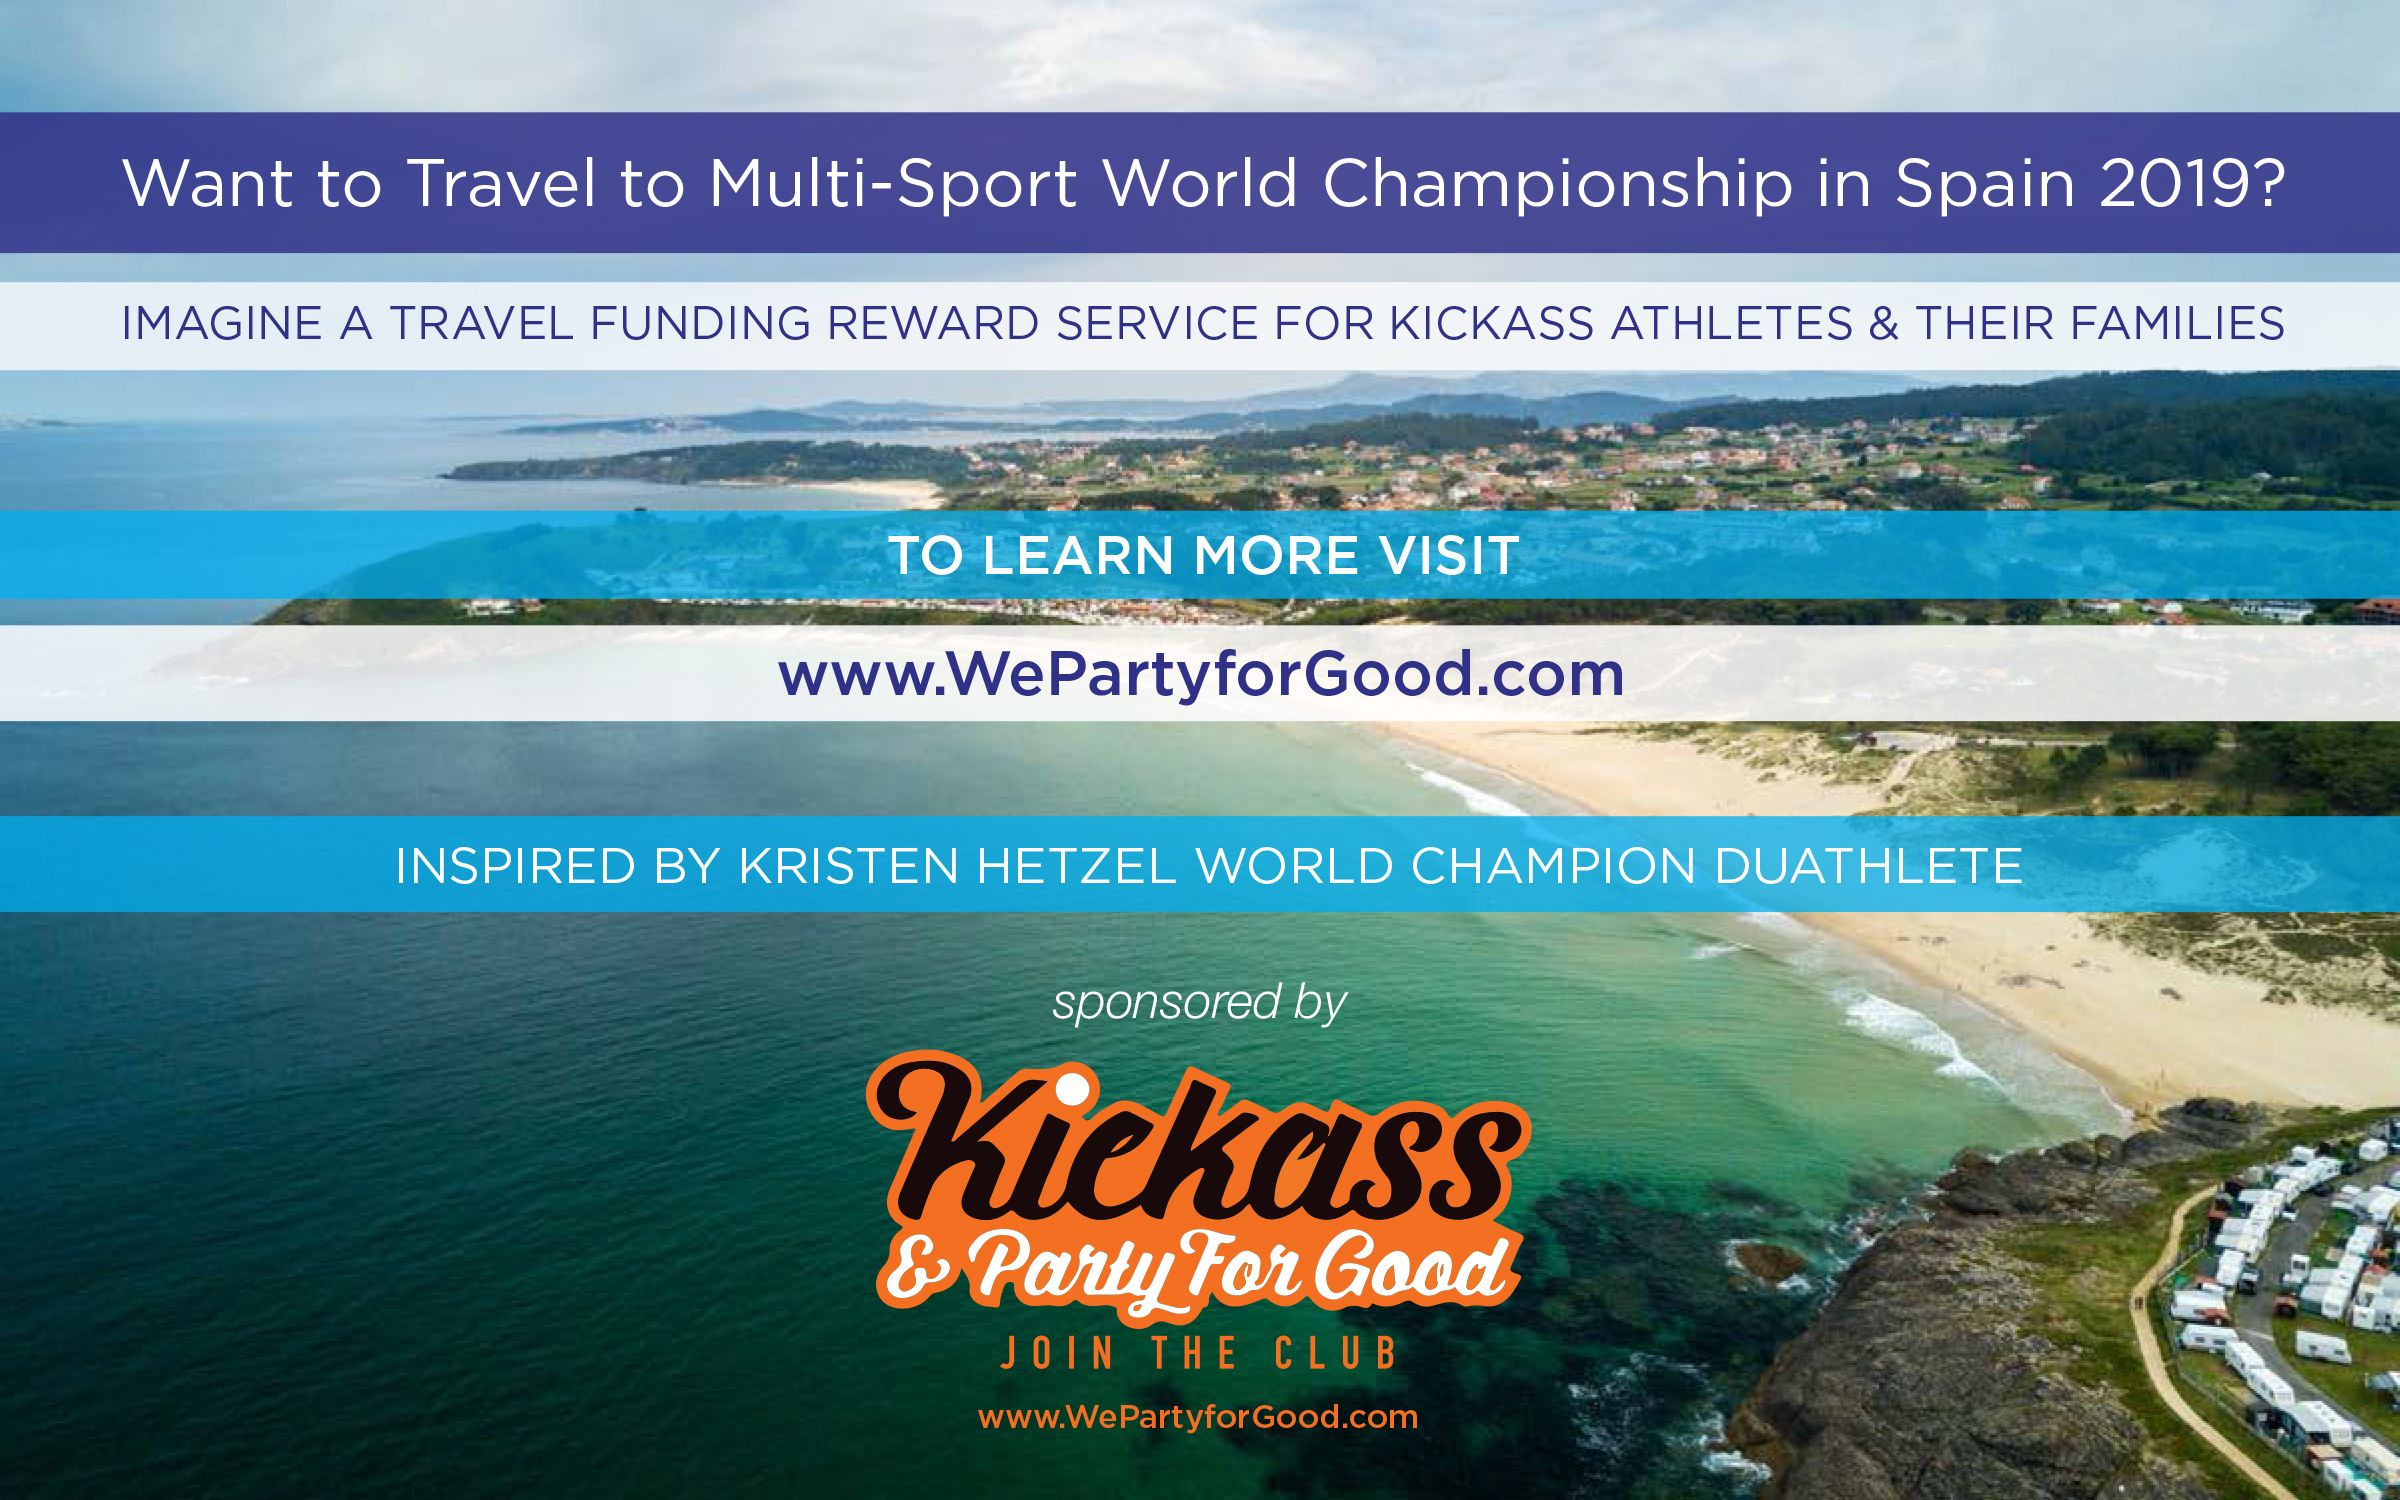 Enjoy Rewarding Travel to Party for Good at 2019 Multi-Sport World Championships in Spain